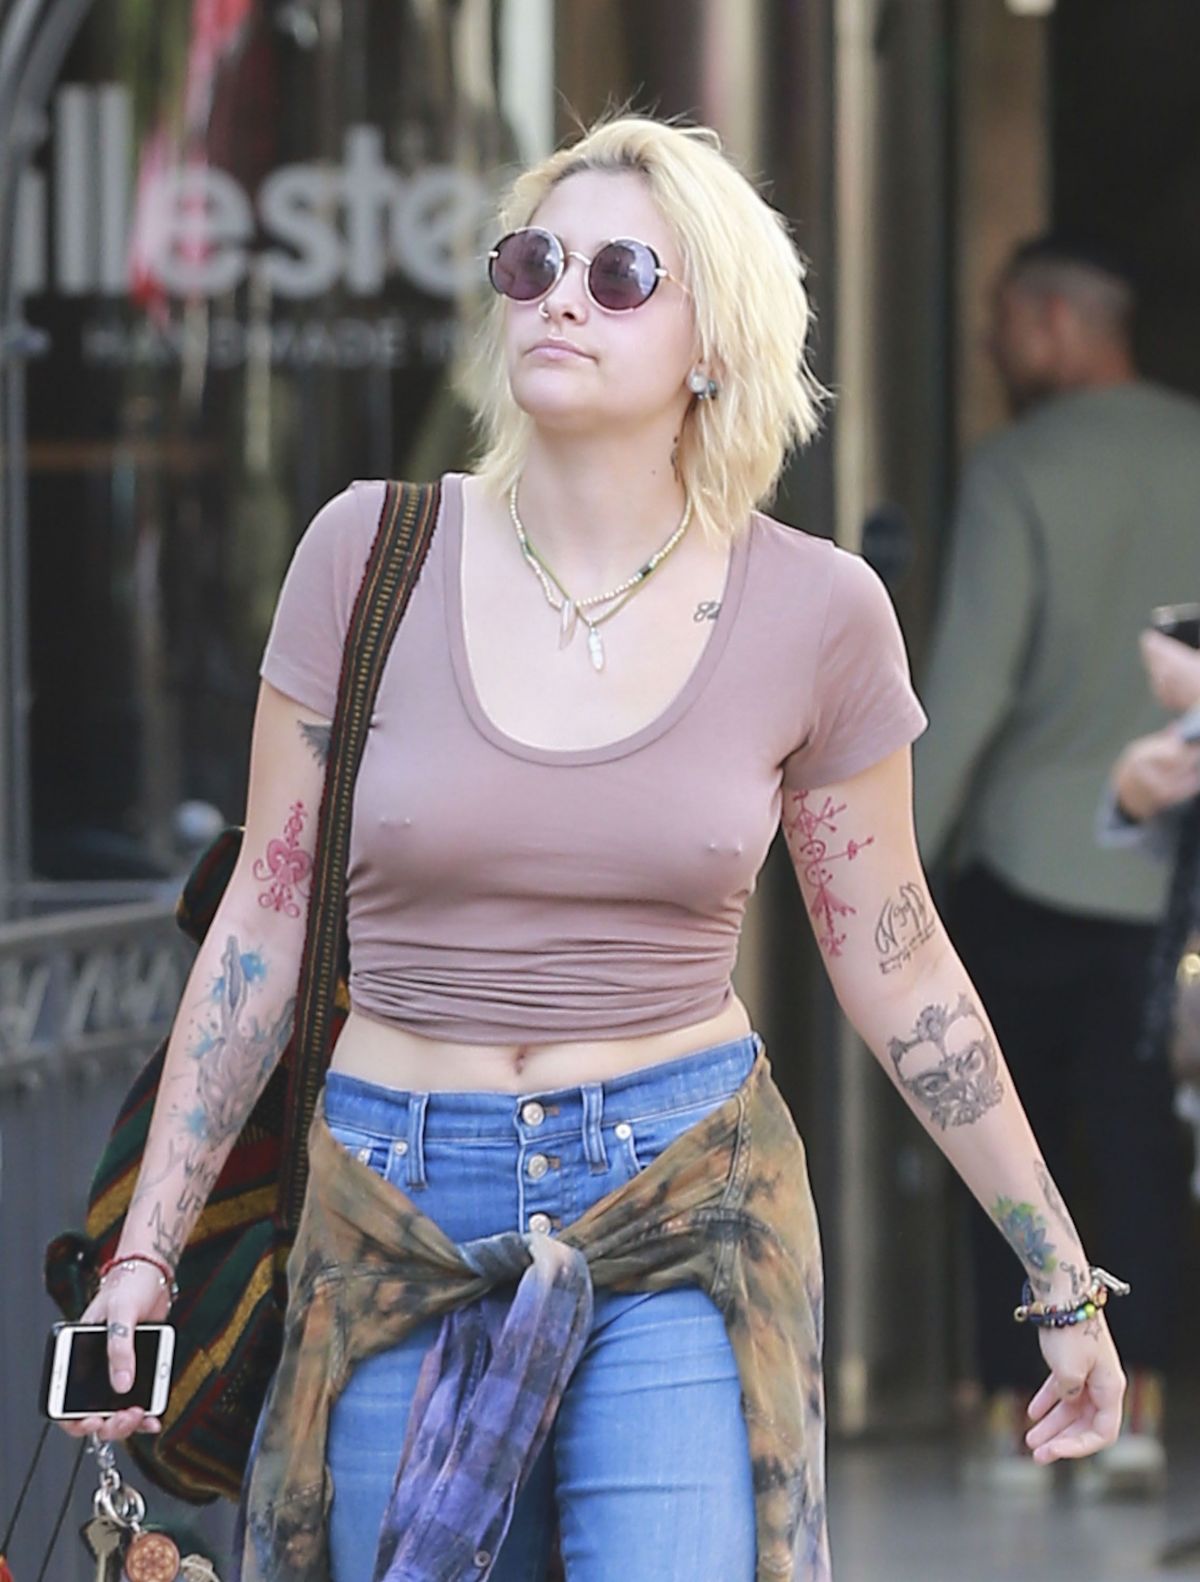 paris-jackson-out-shopping-in-los-angeles-02-15-2017_9.jpg